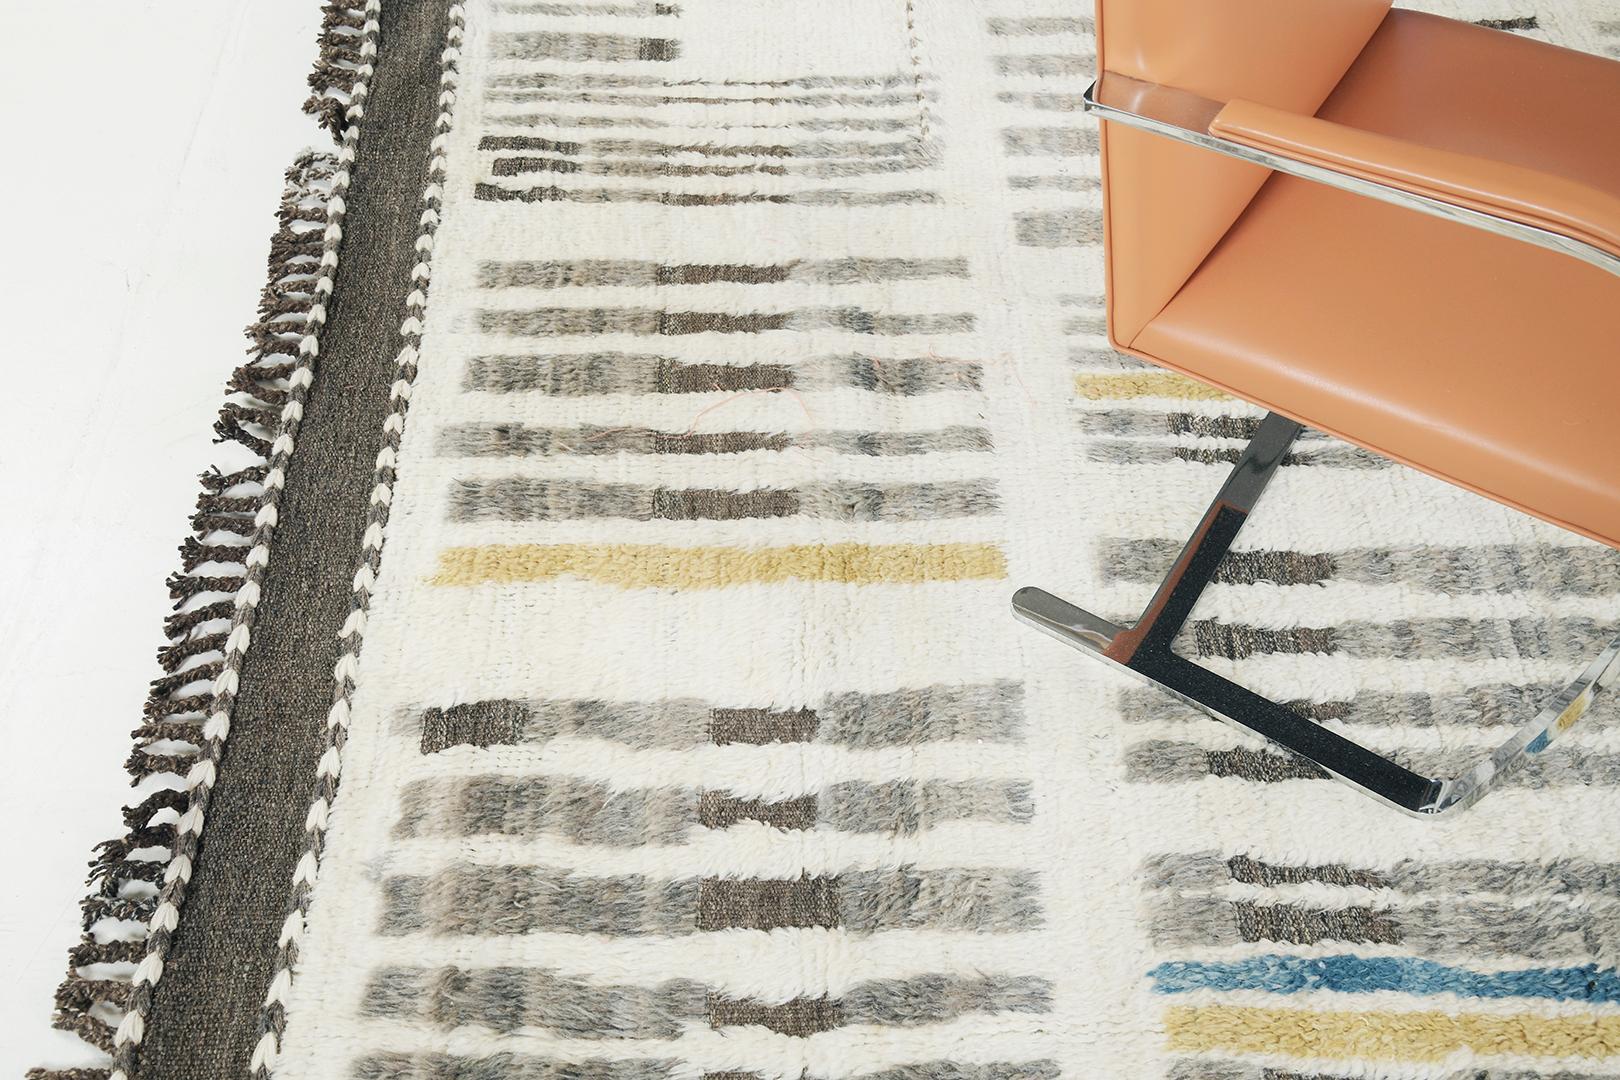 Handwoven of wool, 'Baccata' uses line work and colour to create definition and movement. Line detailing in gray, gold and cobalt blue fascinatingly move across the rug. Detailed natural flat weave runs around the border with tassels adding an